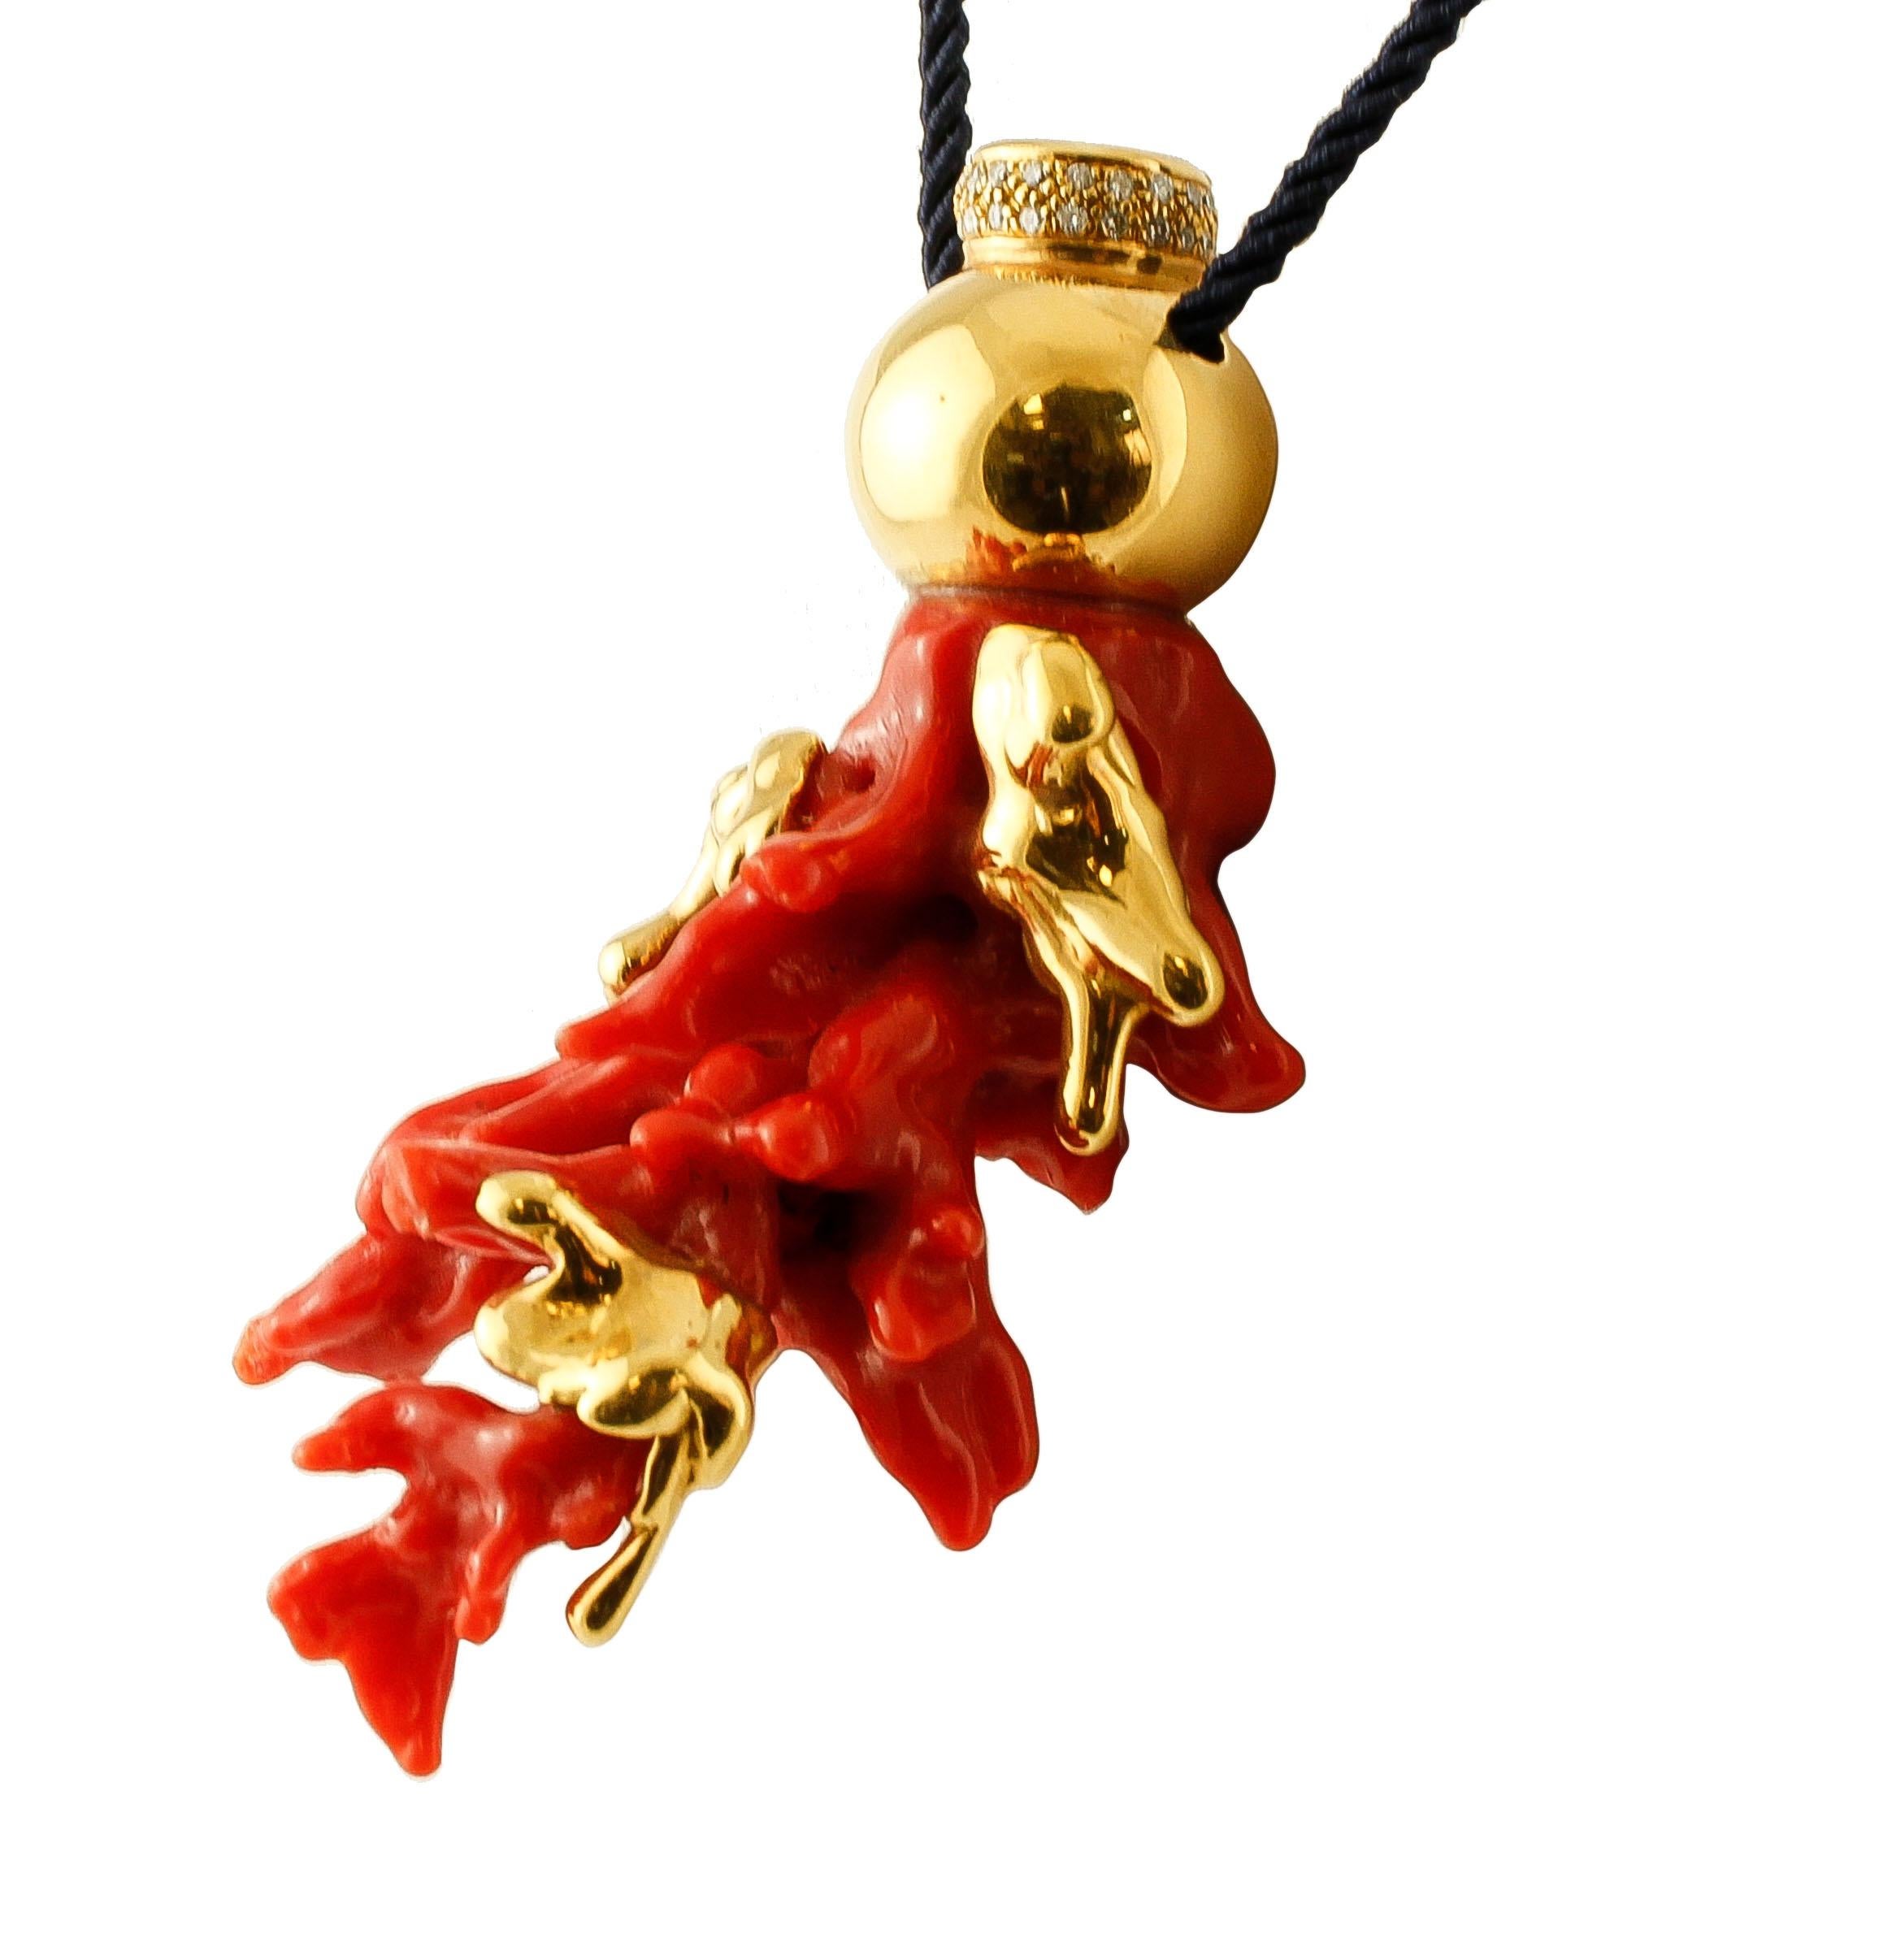 SHIPPING POLICY:
No additional costs will be added to this order.
Shipping costs will be totally covered by the seller (customs duties included).

Astonishing unique-of-a-kind pendant realized with rubrum coral and 18k yellow gold structure. The